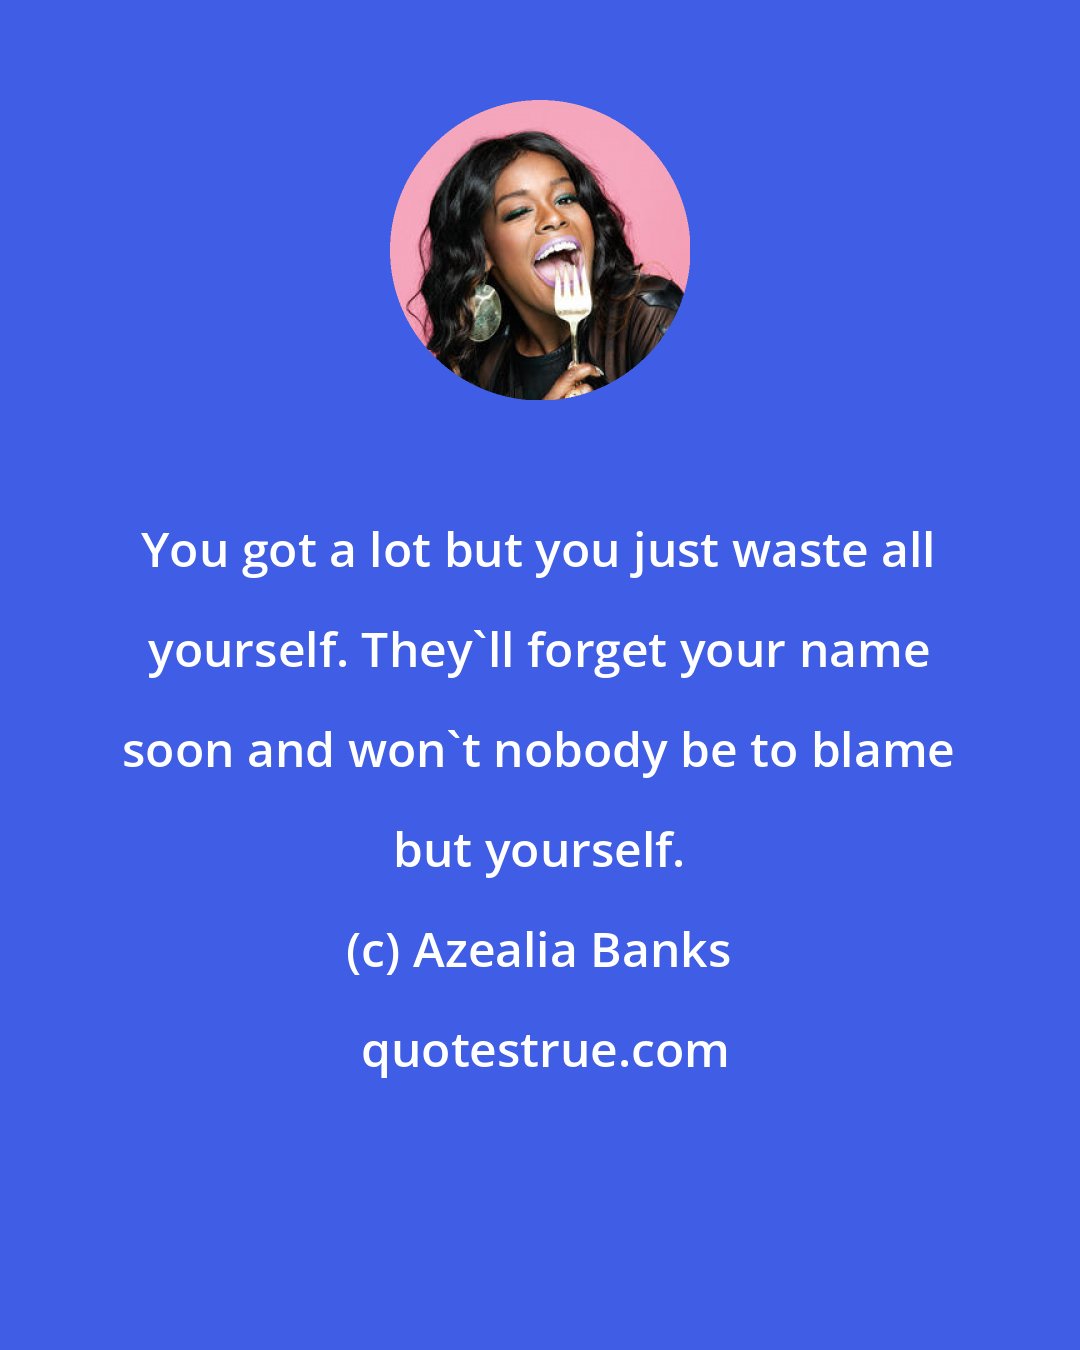 Azealia Banks: You got a lot but you just waste all yourself. They'll forget your name soon and won't nobody be to blame but yourself.